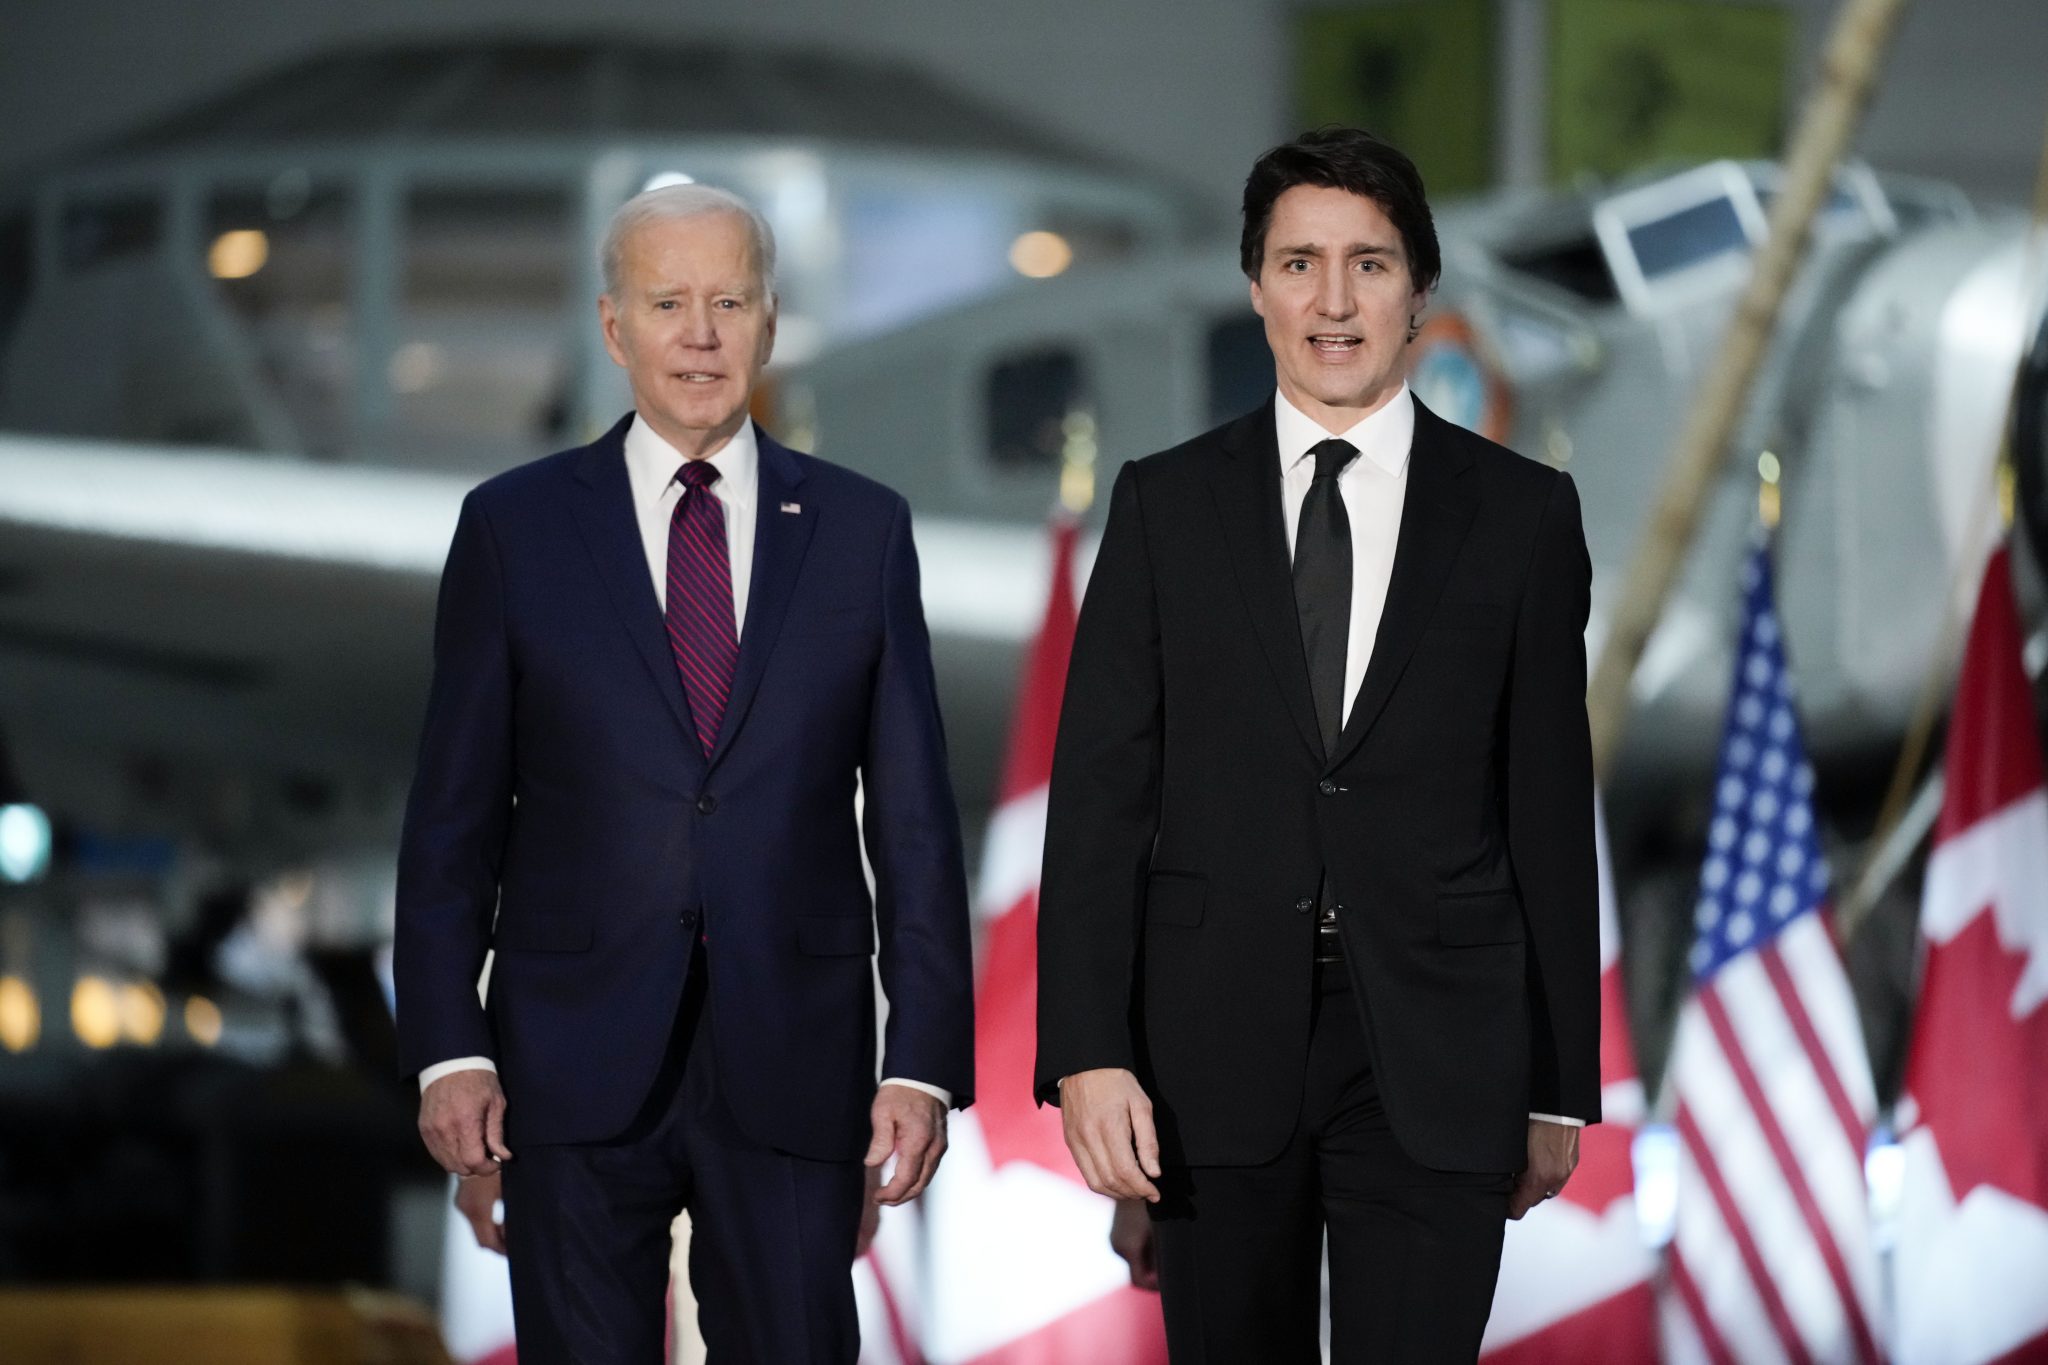 President Joe Biden and Canadian Prime Minister Justin Trudeau arrive for a Gala Dinner at the Canadian Aviation and Space Museum, Friday, March 24, 2023, in Ottawa, Canada.